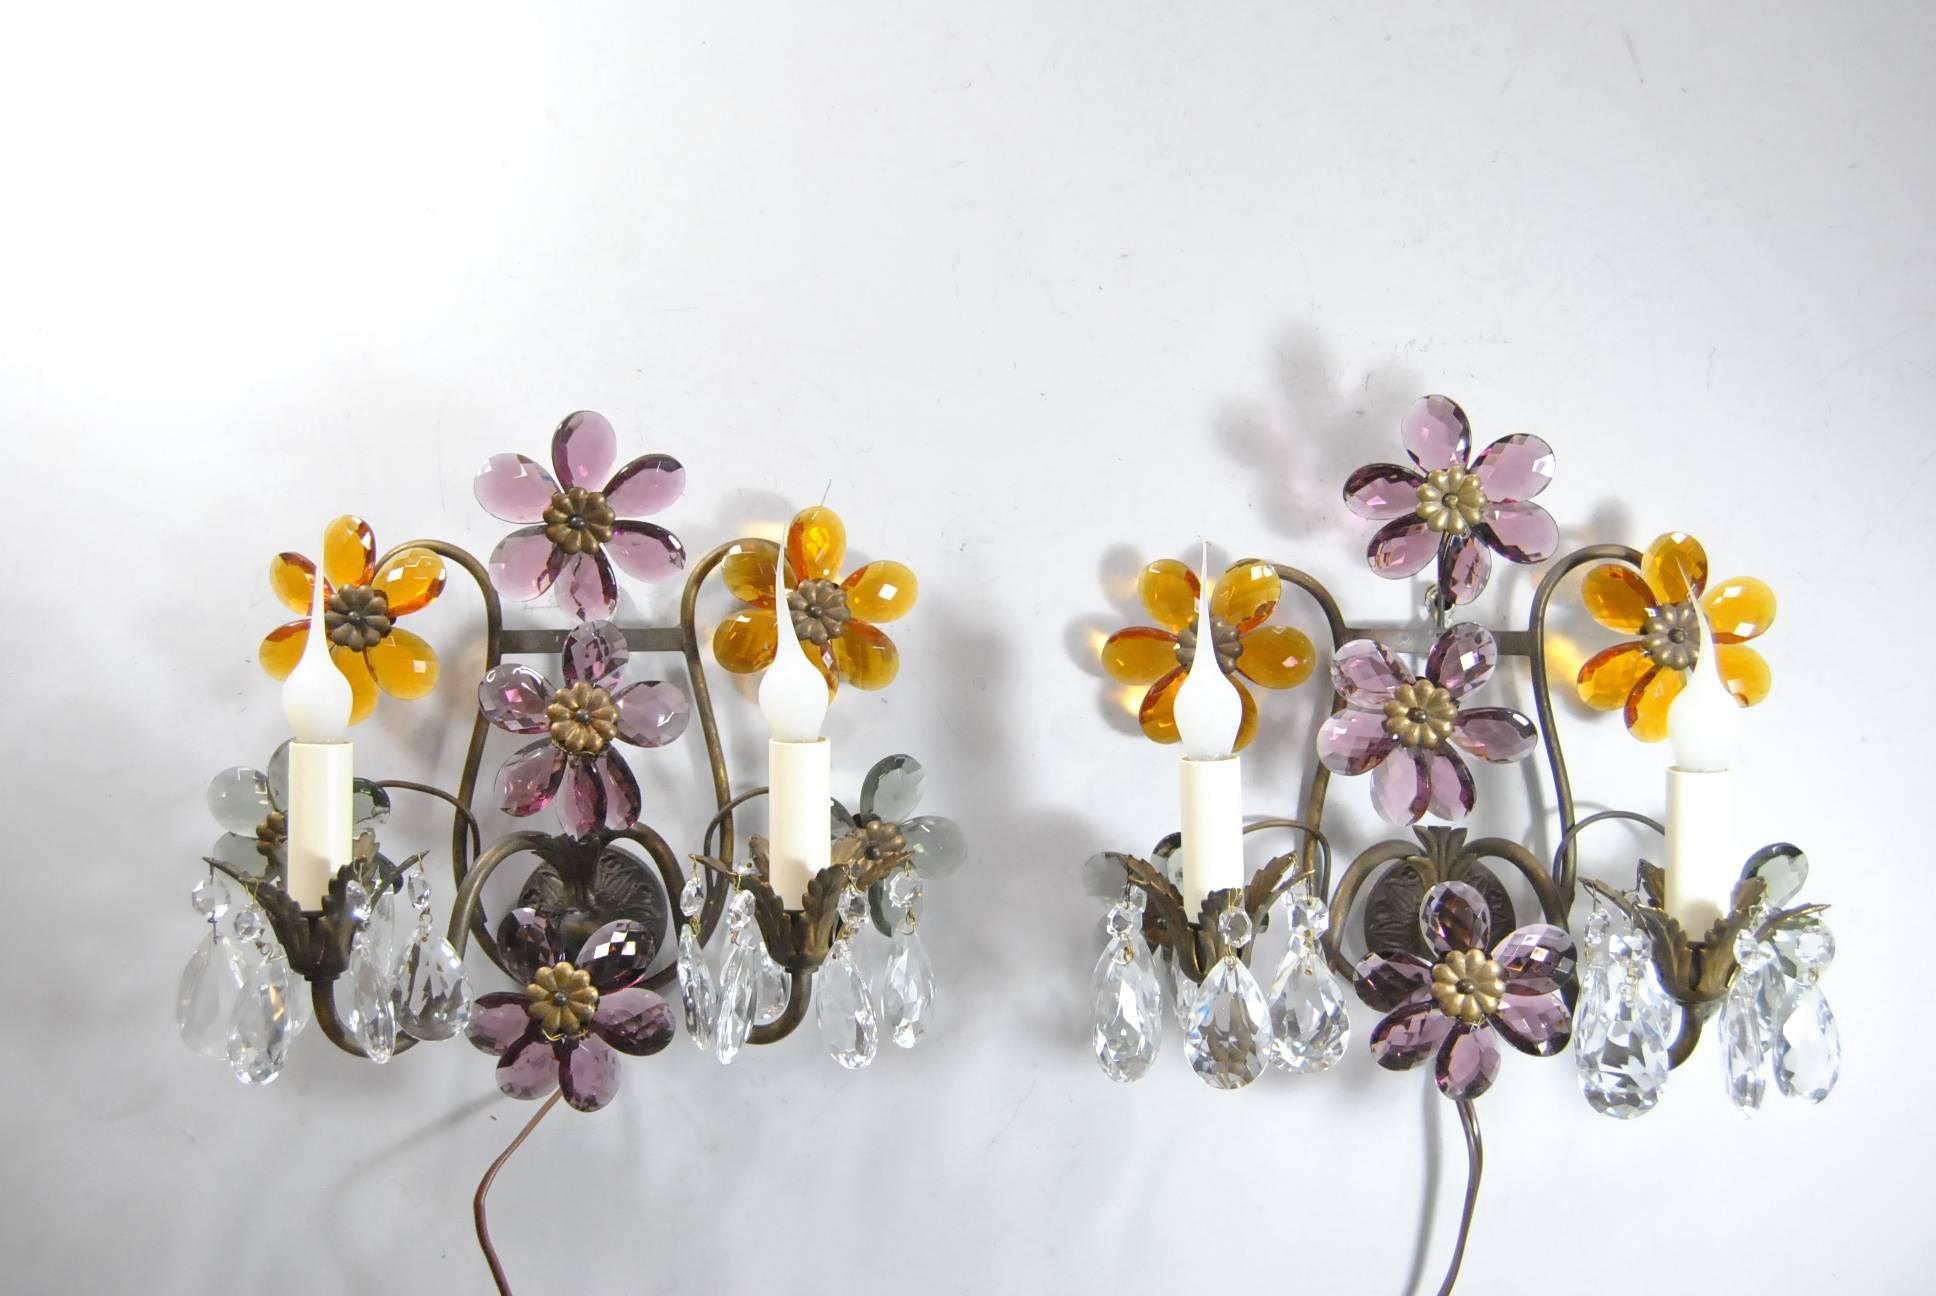 20th Century Antique French Bronze Wall Sconces, Pair with Cut Crystal Floral Design Details For Sale